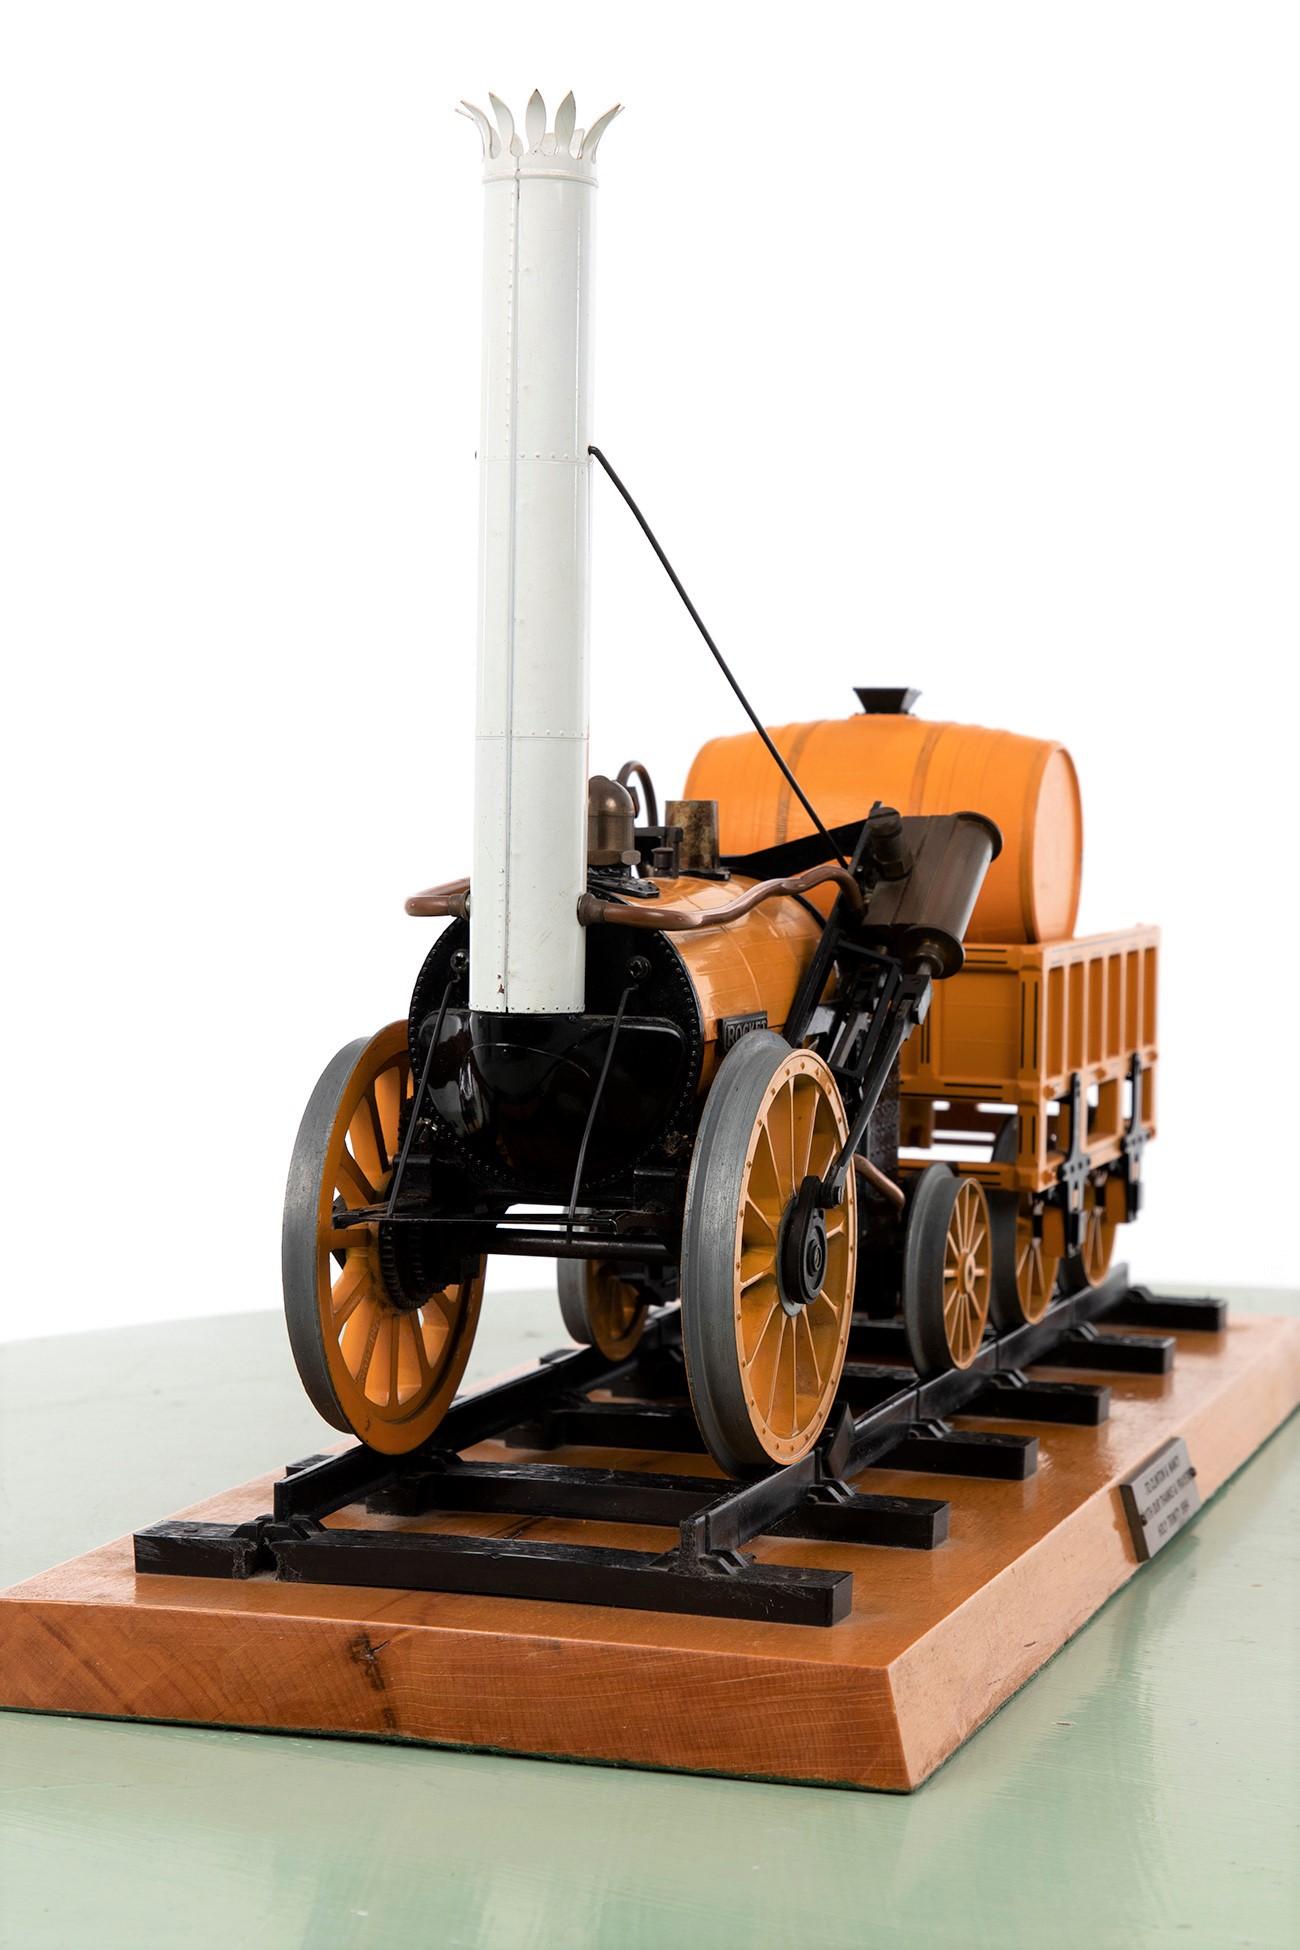 An intricately built to-scale model of Robert Stephenson’s famous 1829 Rocket train. The model Rocket locomotive and coach sit upon a section of railway track. This particular model was gifted in 1984 and comes with a brass plaque to the front. A